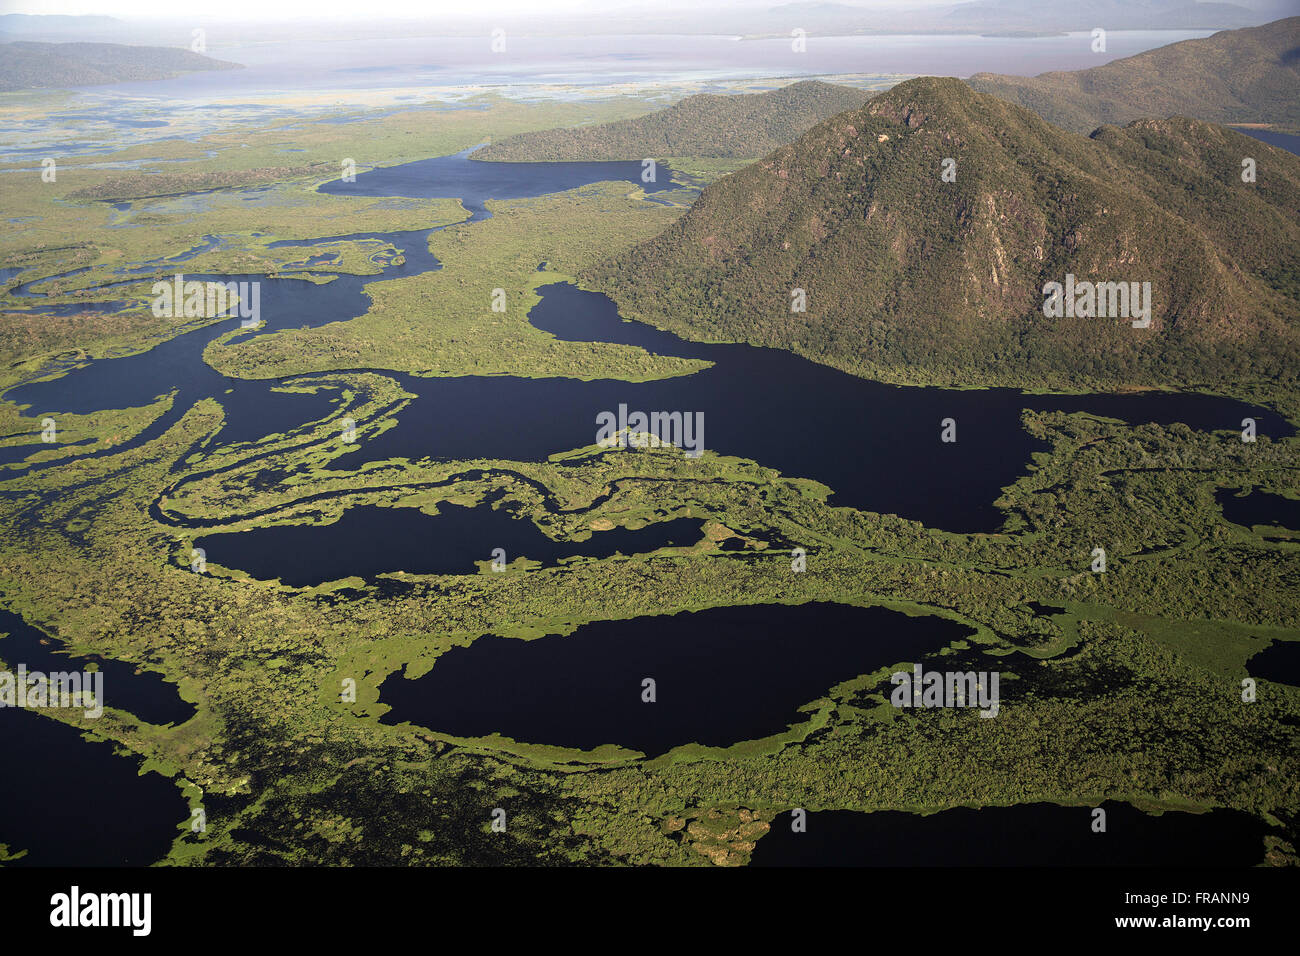 Aerial view of PRNP Eliezer Batista on the right bank of the Paraguay River Stock Photo